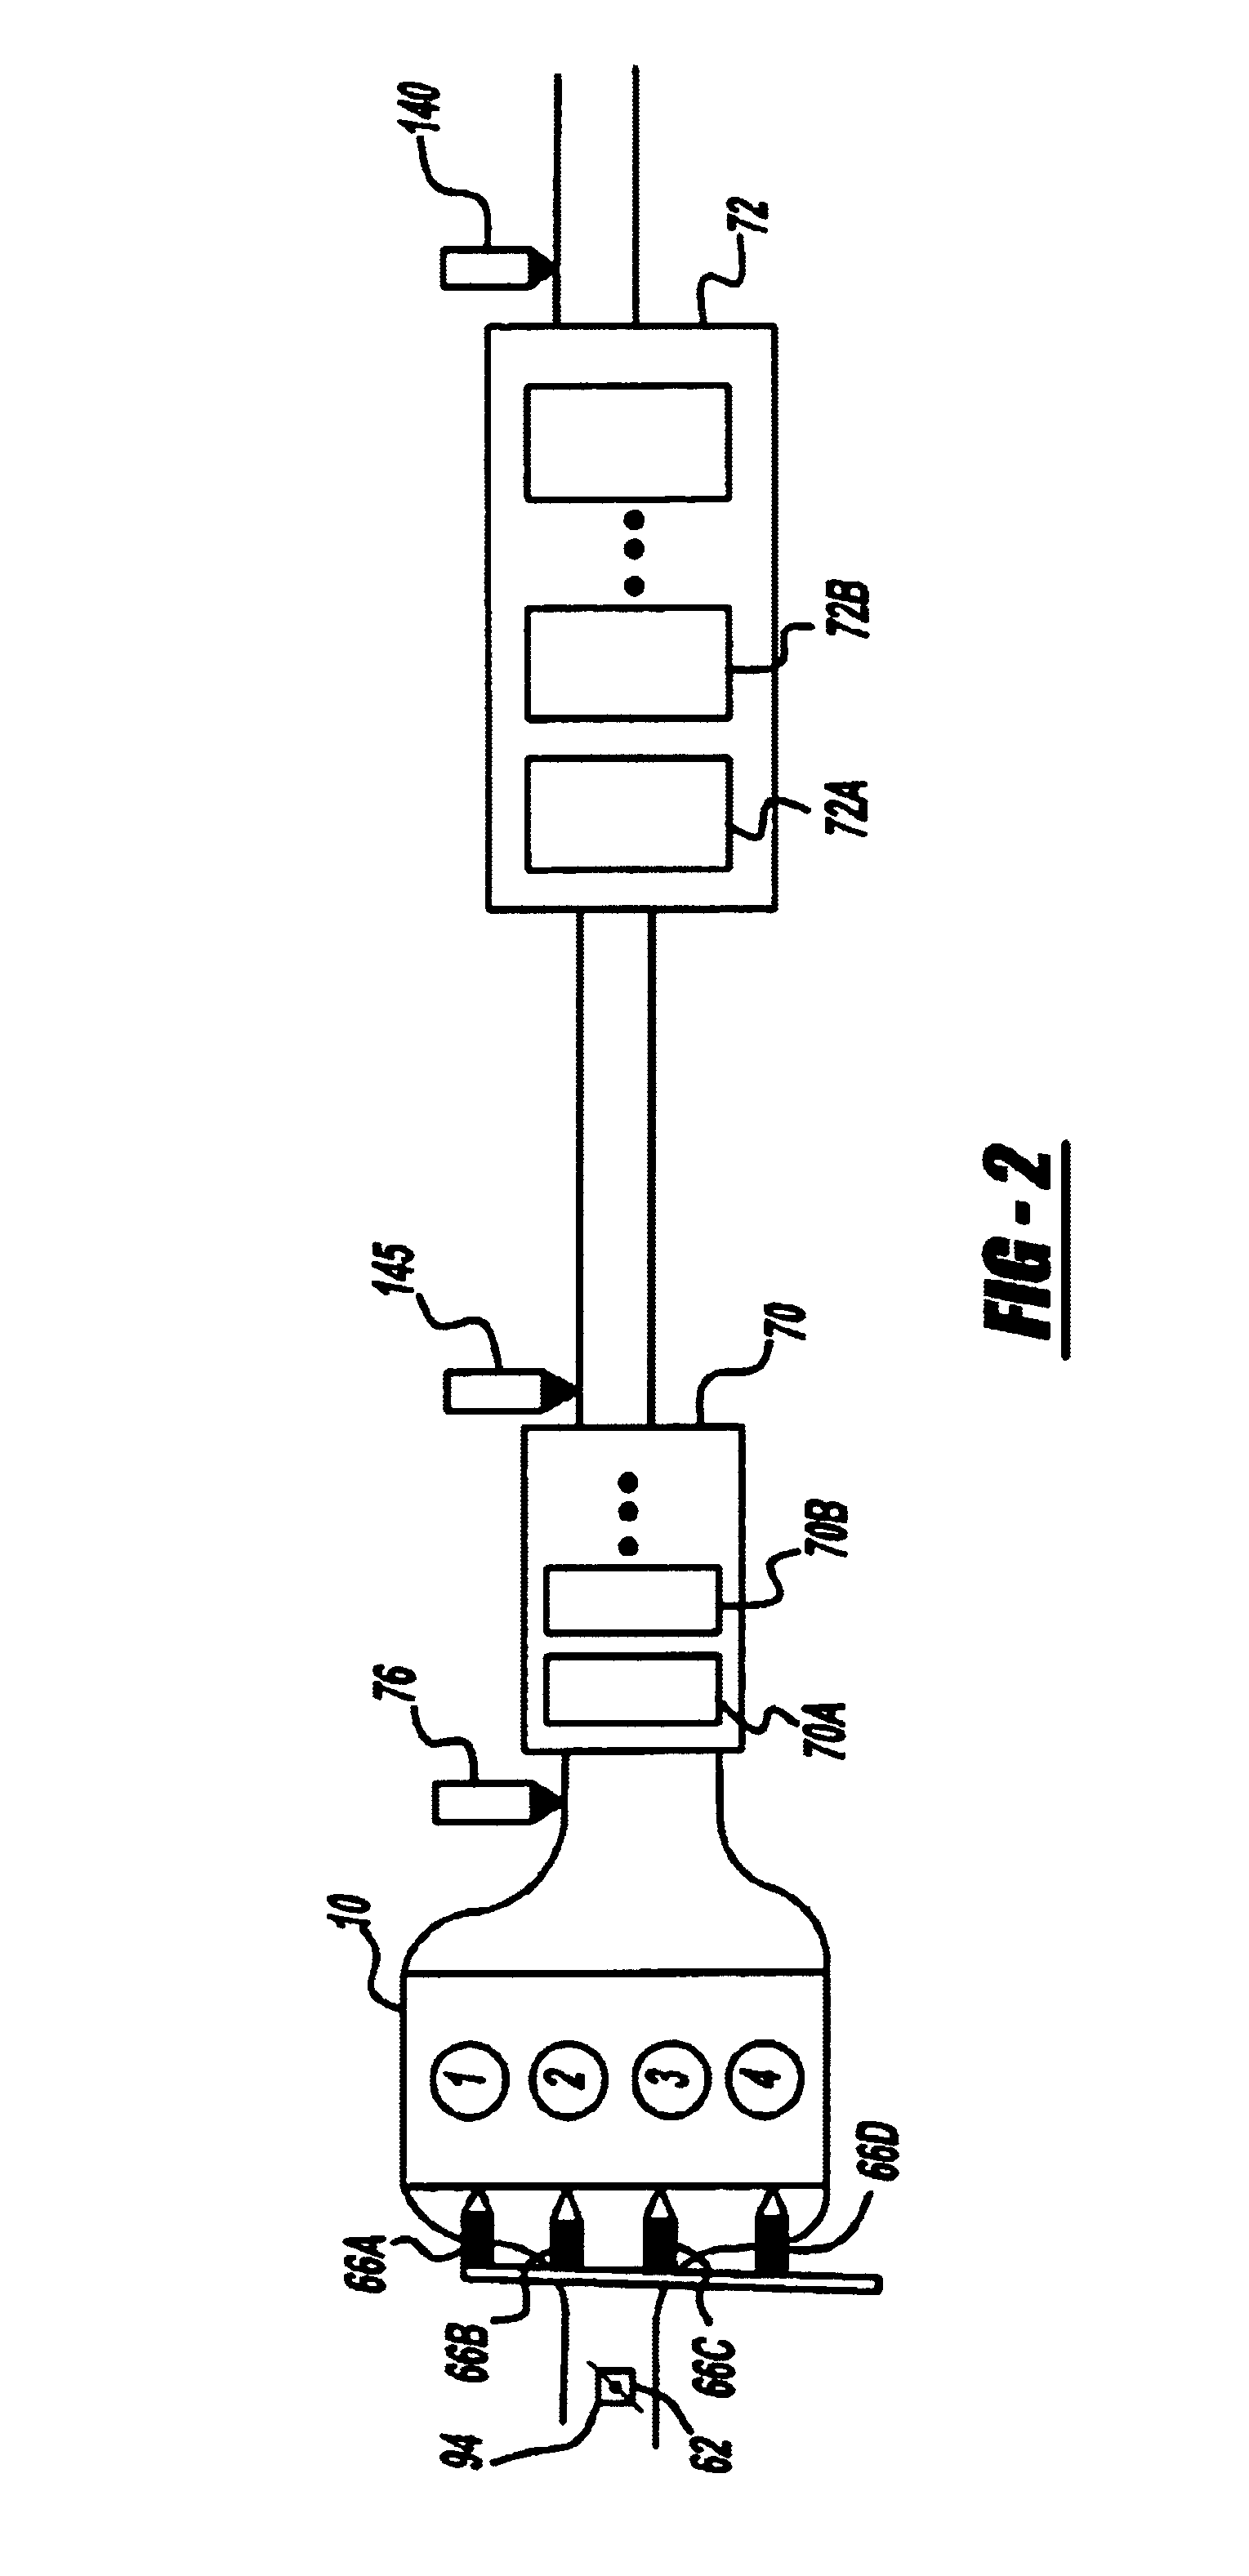 Computer controlled engine adjustment based on an exhaust flow